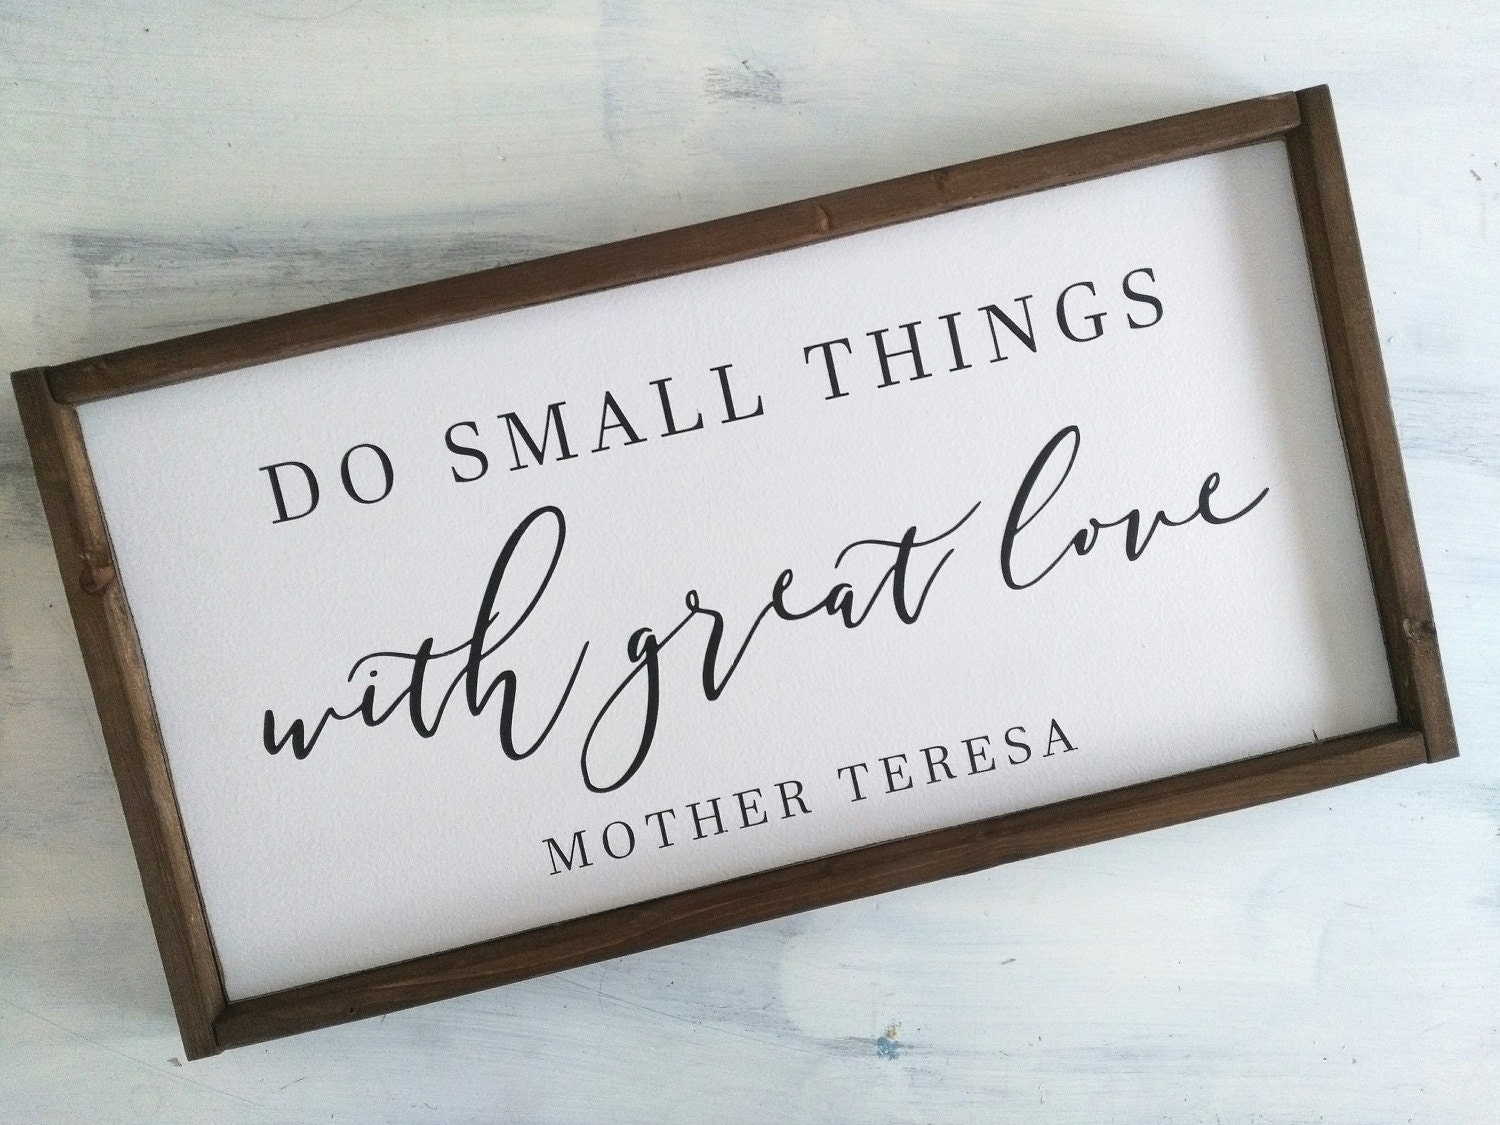 Details "DO SMALL THINGS WITH GREAT LOVE" Sign